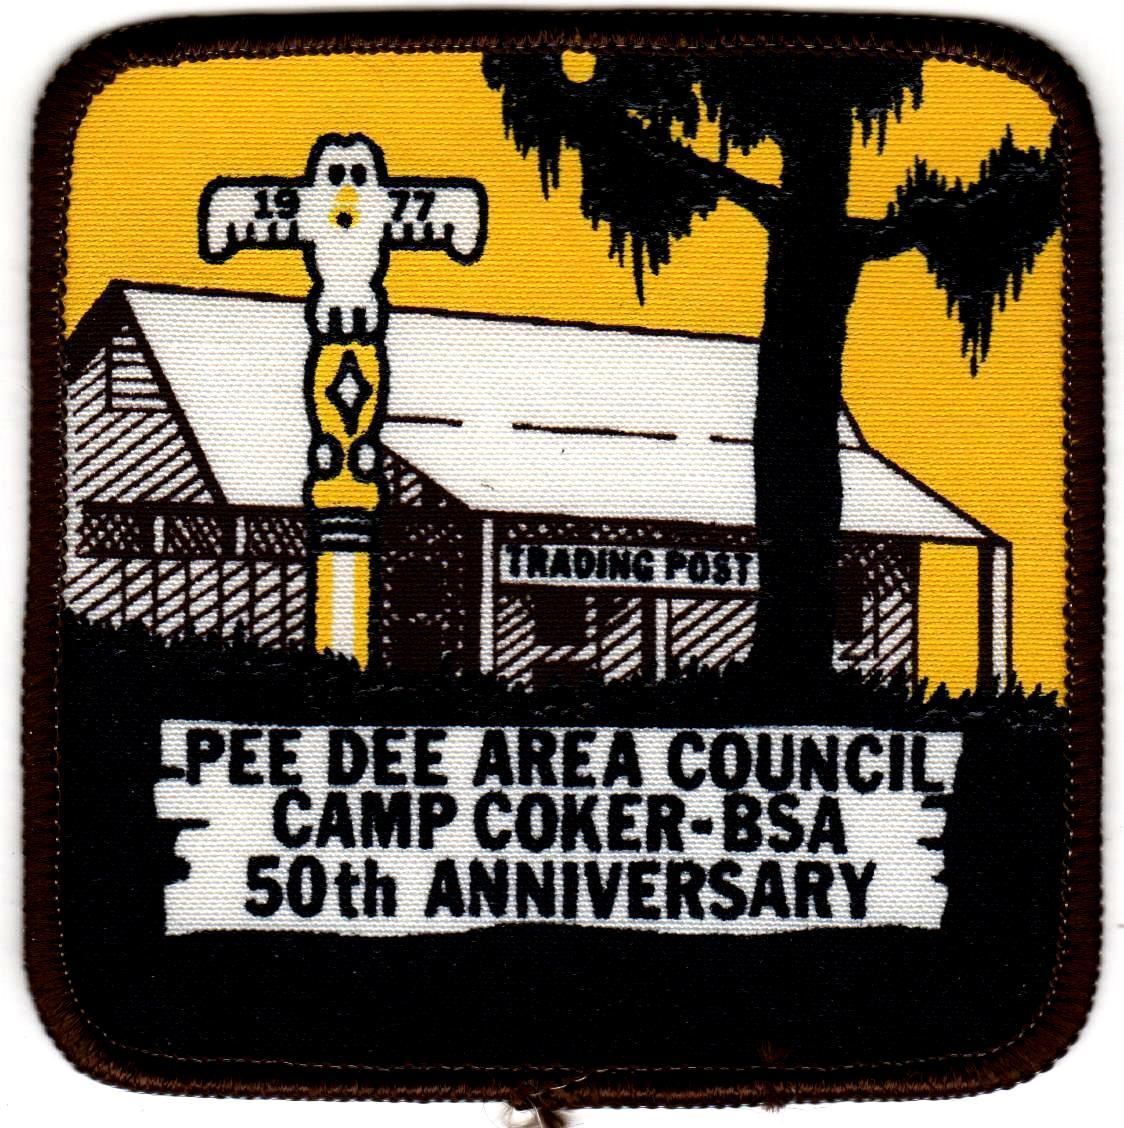 1978 Camp Coker 50th Anniversary (says 1977 by mistake) Pee Dee Area